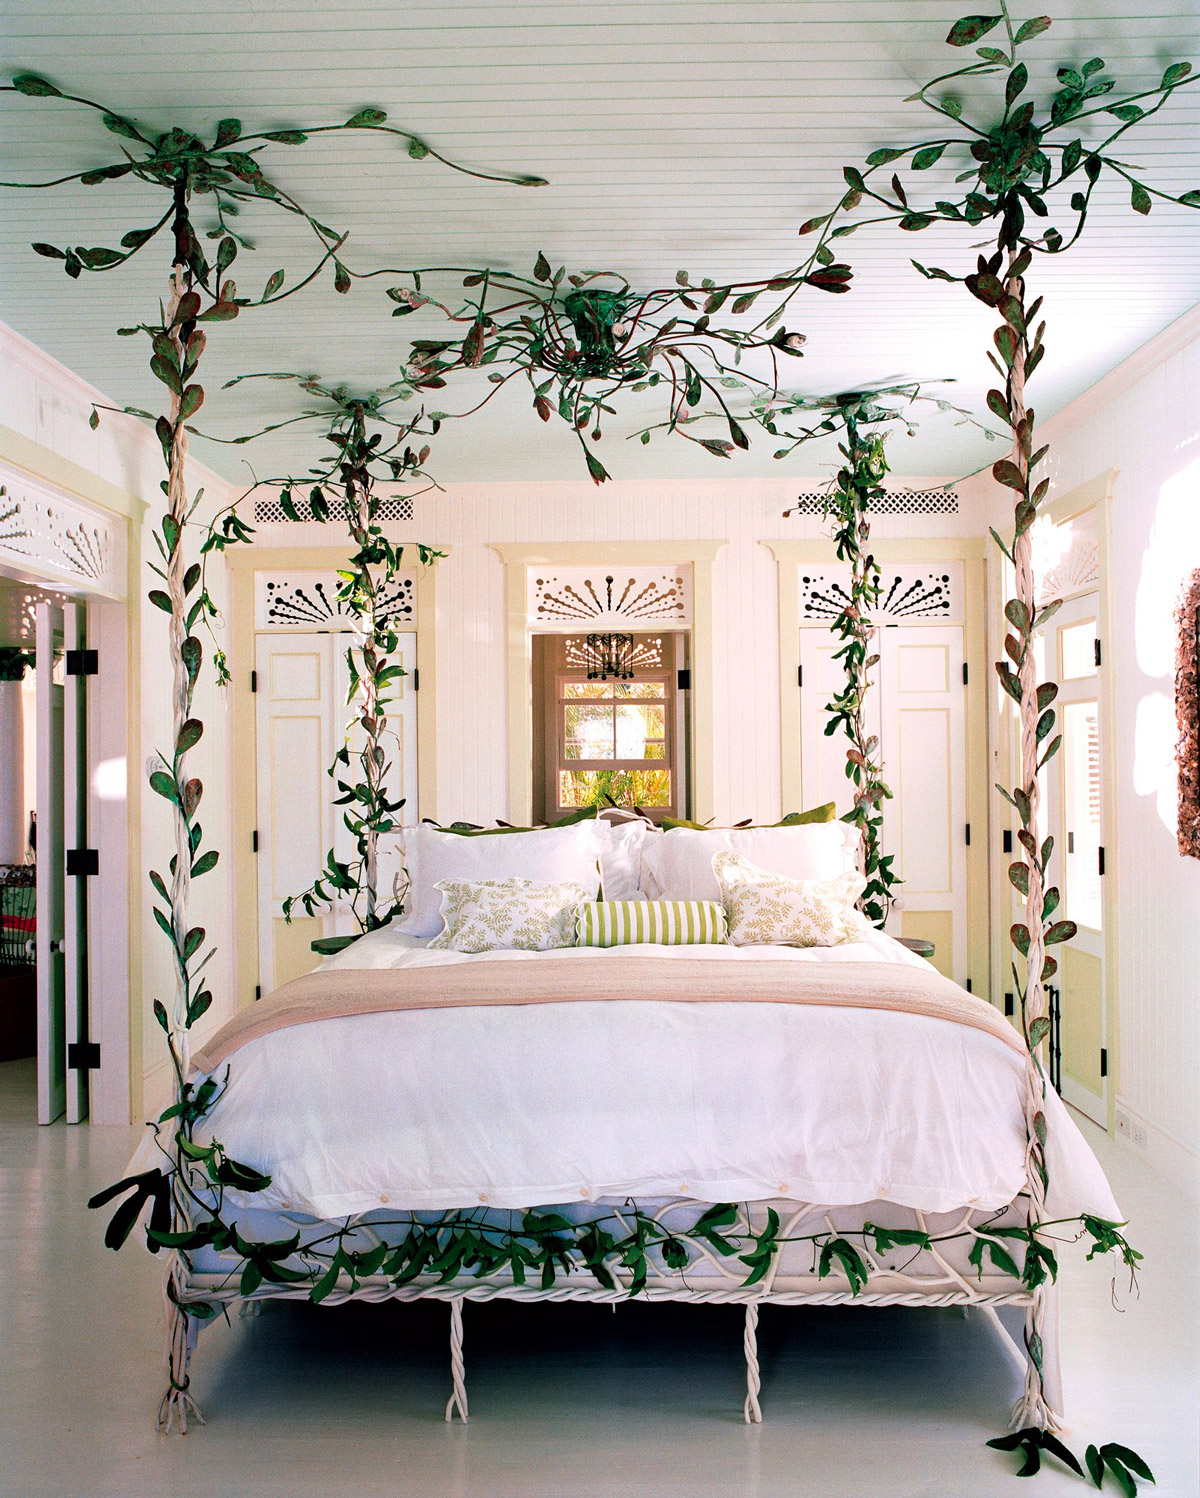 Beautiful bedroom decor with beauty frame beds "width =" 1200 "height =" 1498 "srcset =" https://mileray.com/wp-content/uploads/2020/05/1588507898_618_The-Best-15-Bedroom-Design-Ideas-Which-Show-Gorgeous-and.jpg 1200w, https: // mileray.com /wp-content/uploads/2016/12/Celerie-Kemble-240x300.jpg 240w, https://mileray.com/wp-content/uploads/2016/12/Celerie-Kemble-768x959.jpg 768w, https: / /mileray.com/wp-content/uploads/2016/12/Celerie-Kemble-820x1024.jpg 820w, https://mileray.com/wp-content/uploads/2016/12/Celerie-Kemble-696x869 .jpg 696w , https://mileray.com/wp-content/uploads/2016/12/Celerie-Kemble-1068x1333.jpg 1068w, https://mileray.com/wp-content/uploads/2016/12/Celerie -Kemble- 336x420.jpg 336w "sizes =" (maximum width: 1200px) 100vw, 1200px